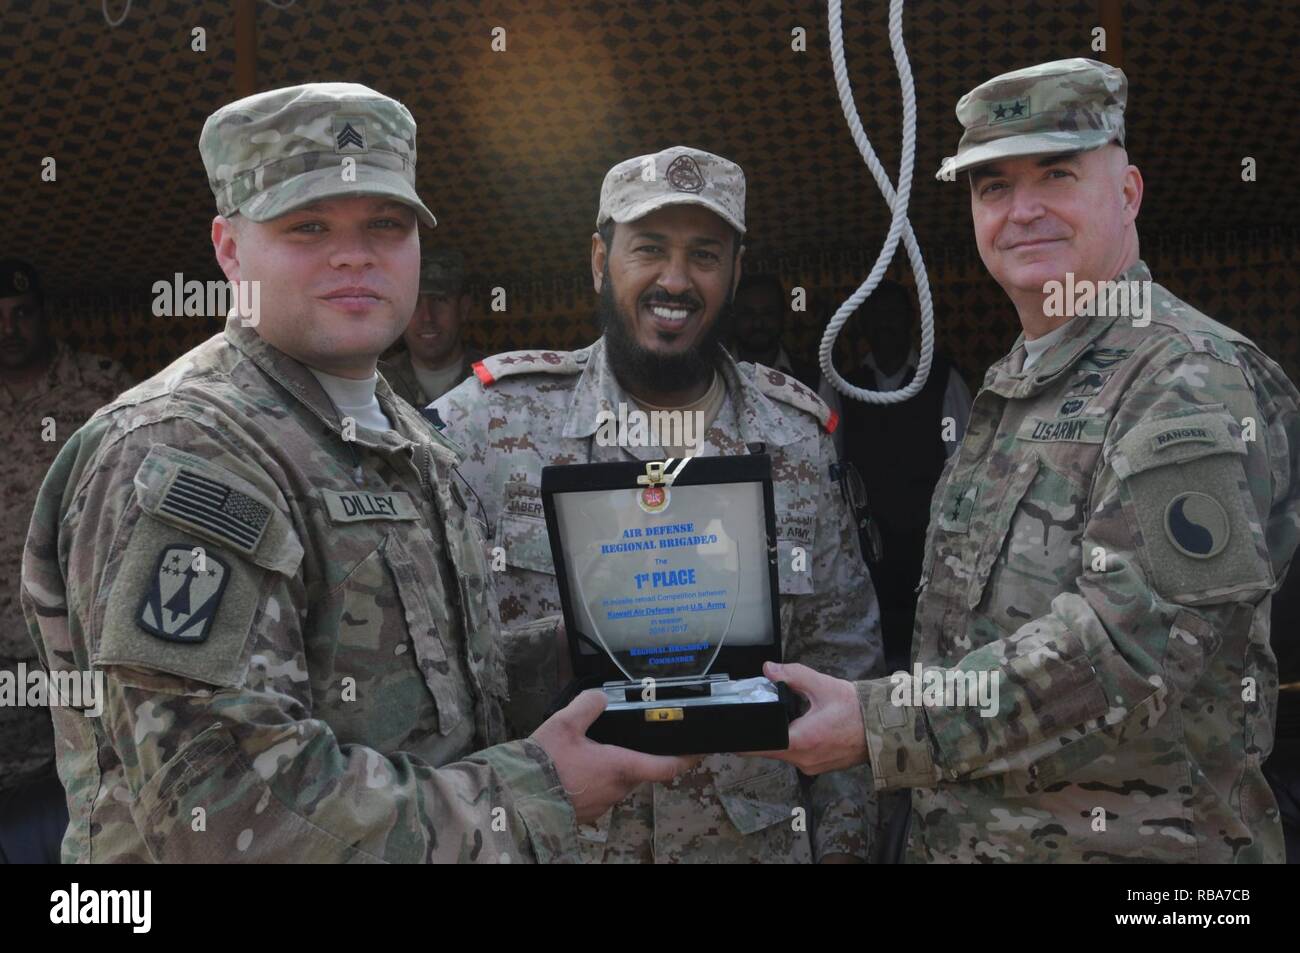 Sgt. Brian Dilley, a squad leader with the 69th Air Defense Artillery Brigade, accepts the First Place award on behalf of his unit from Major General Blake Ortner, Commander of the 29th Infantry Division and Col. Jabar Al-boti of the Kuwaiti Air Defense Force during Patriot Day activities at Kuwaiti Air Defense Force Headquarters in Kuwait December 28, 2016. The friendly competition between the Kuwaitis and the 69th ADA included events such as setting up an MIM-104 Patriot weapons system, a soccer game, and tug-of-war. ( Stock Photo